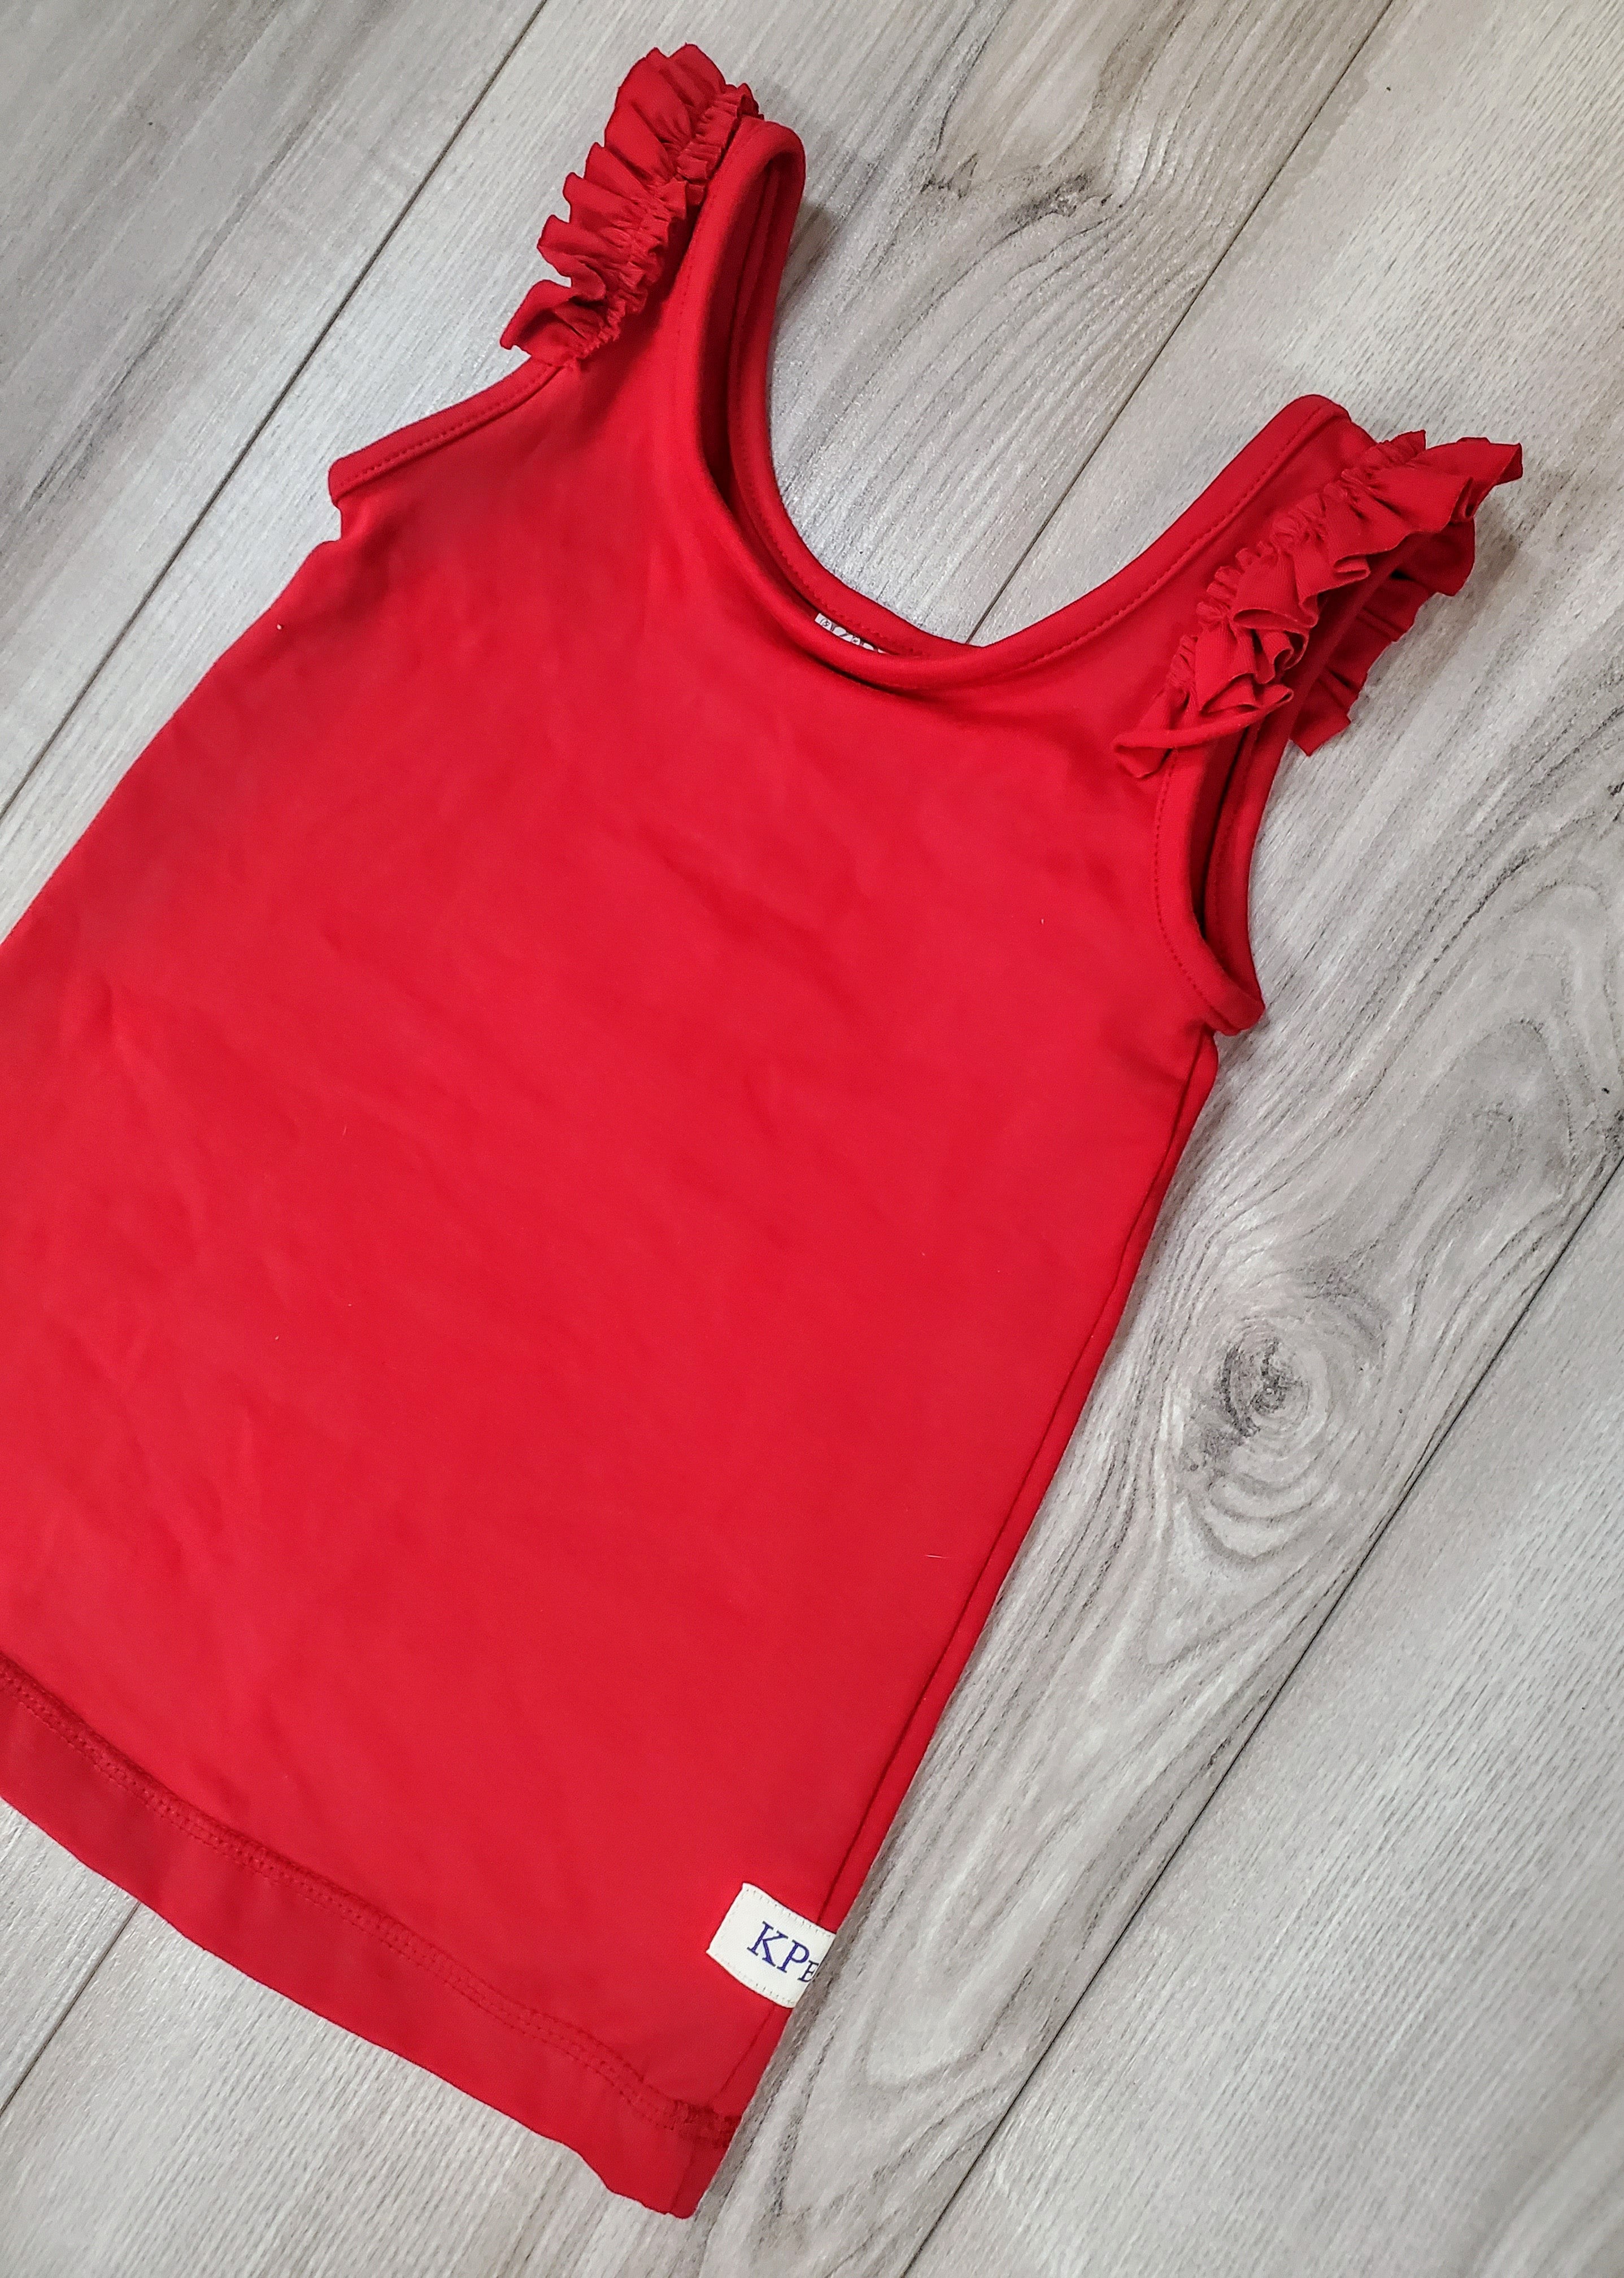 Ruby Red Zöe Top